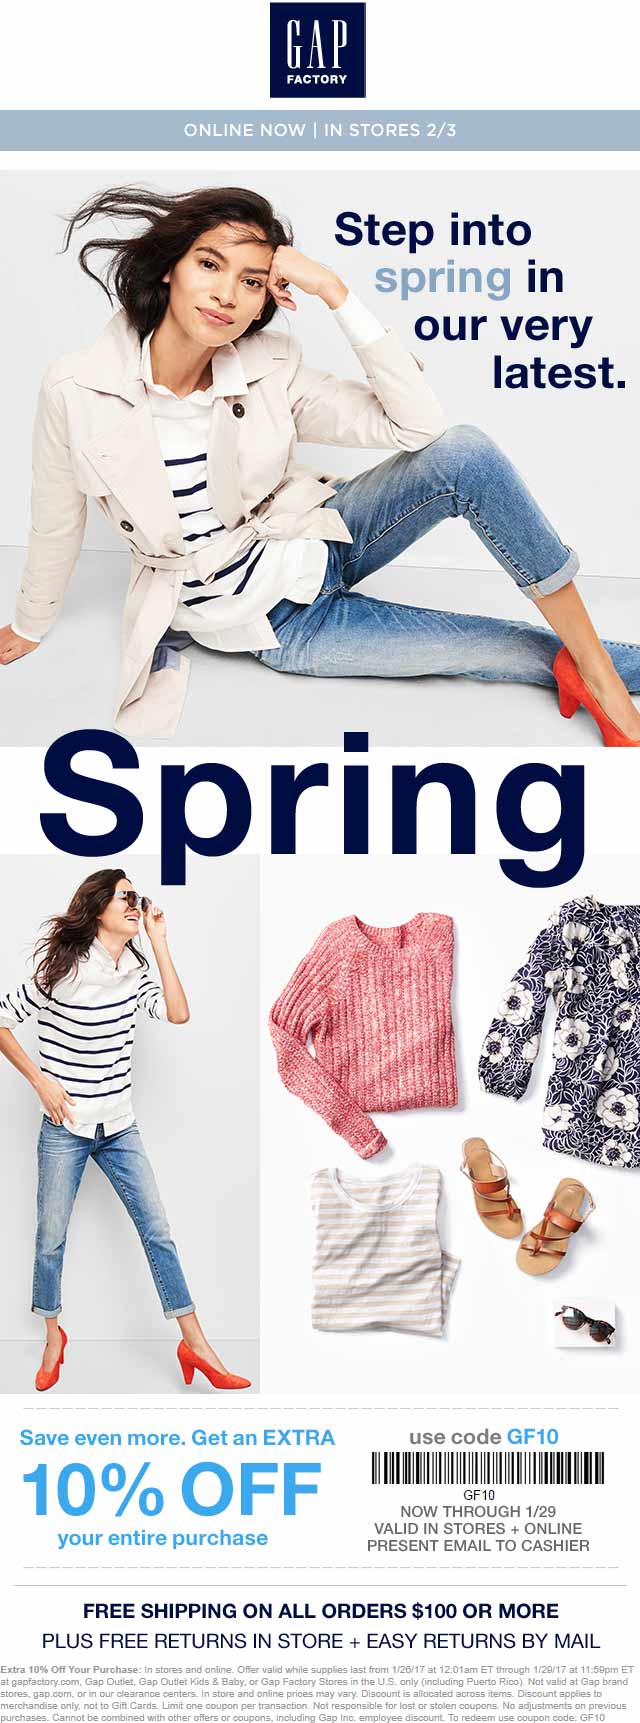 Gap Factory June 2020 Coupons and Promo Codes 🛒